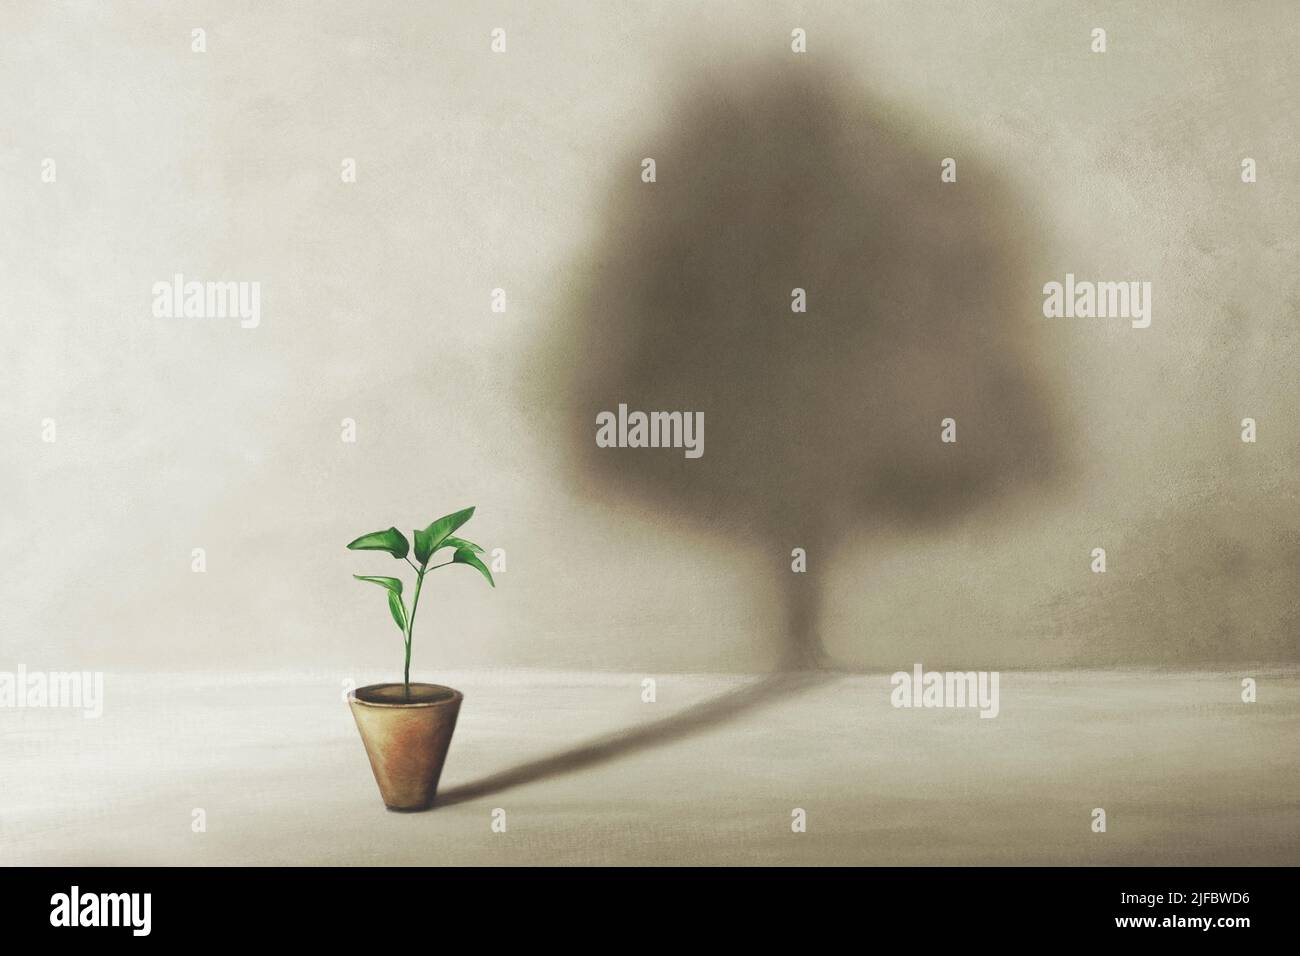 birth of a small plant with surreal shadow of a large tree, concept of life Stock Photo